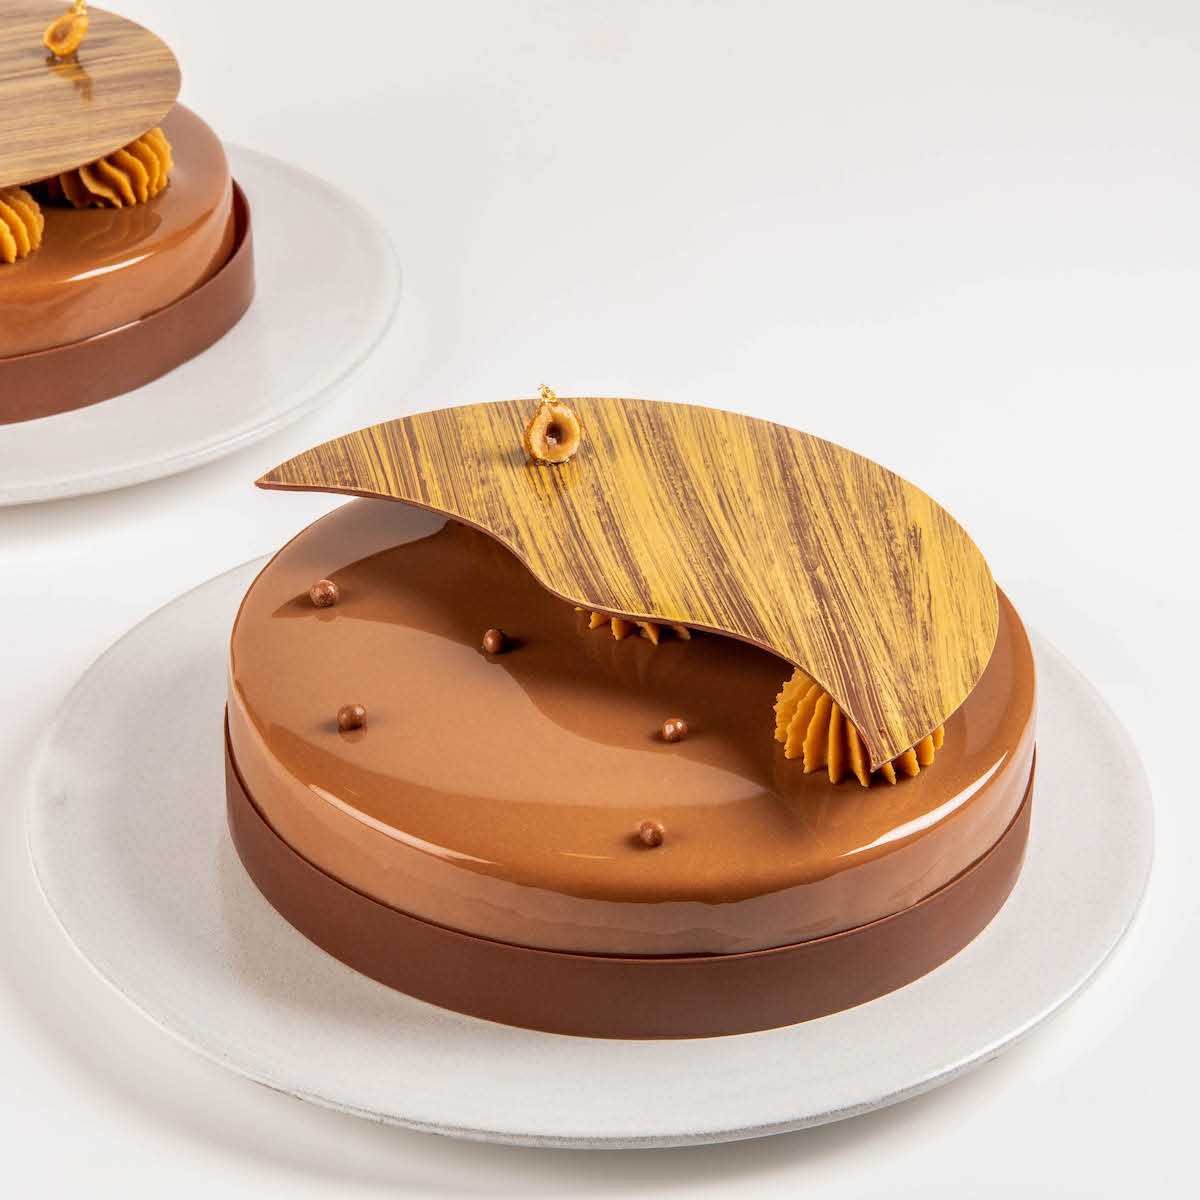 Mousse cake-Live class for free